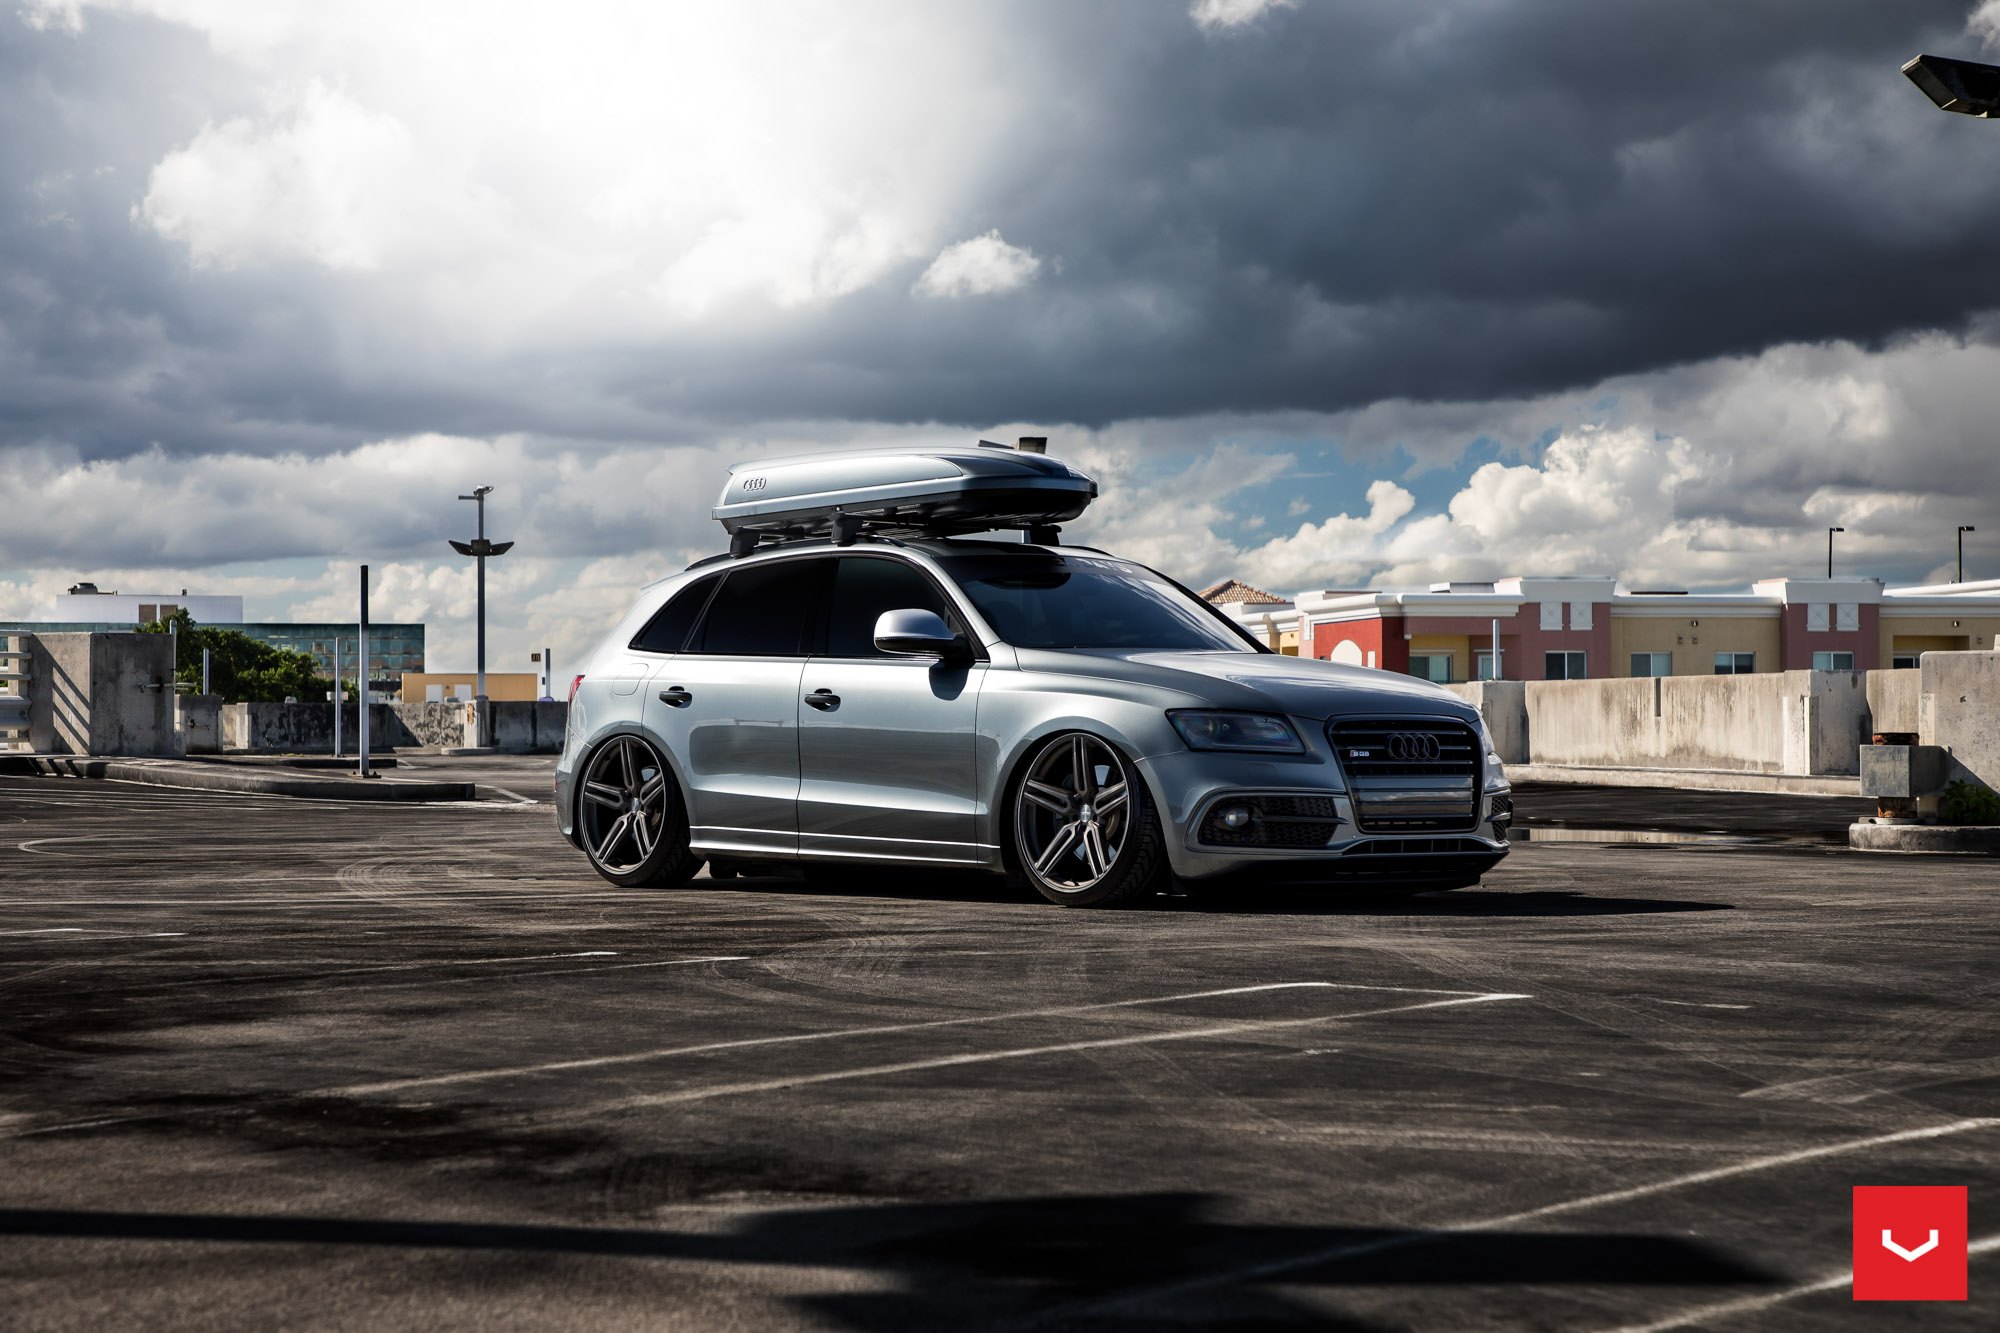 Gray Audi Q5 with Roof Rack - Photo by Vossen